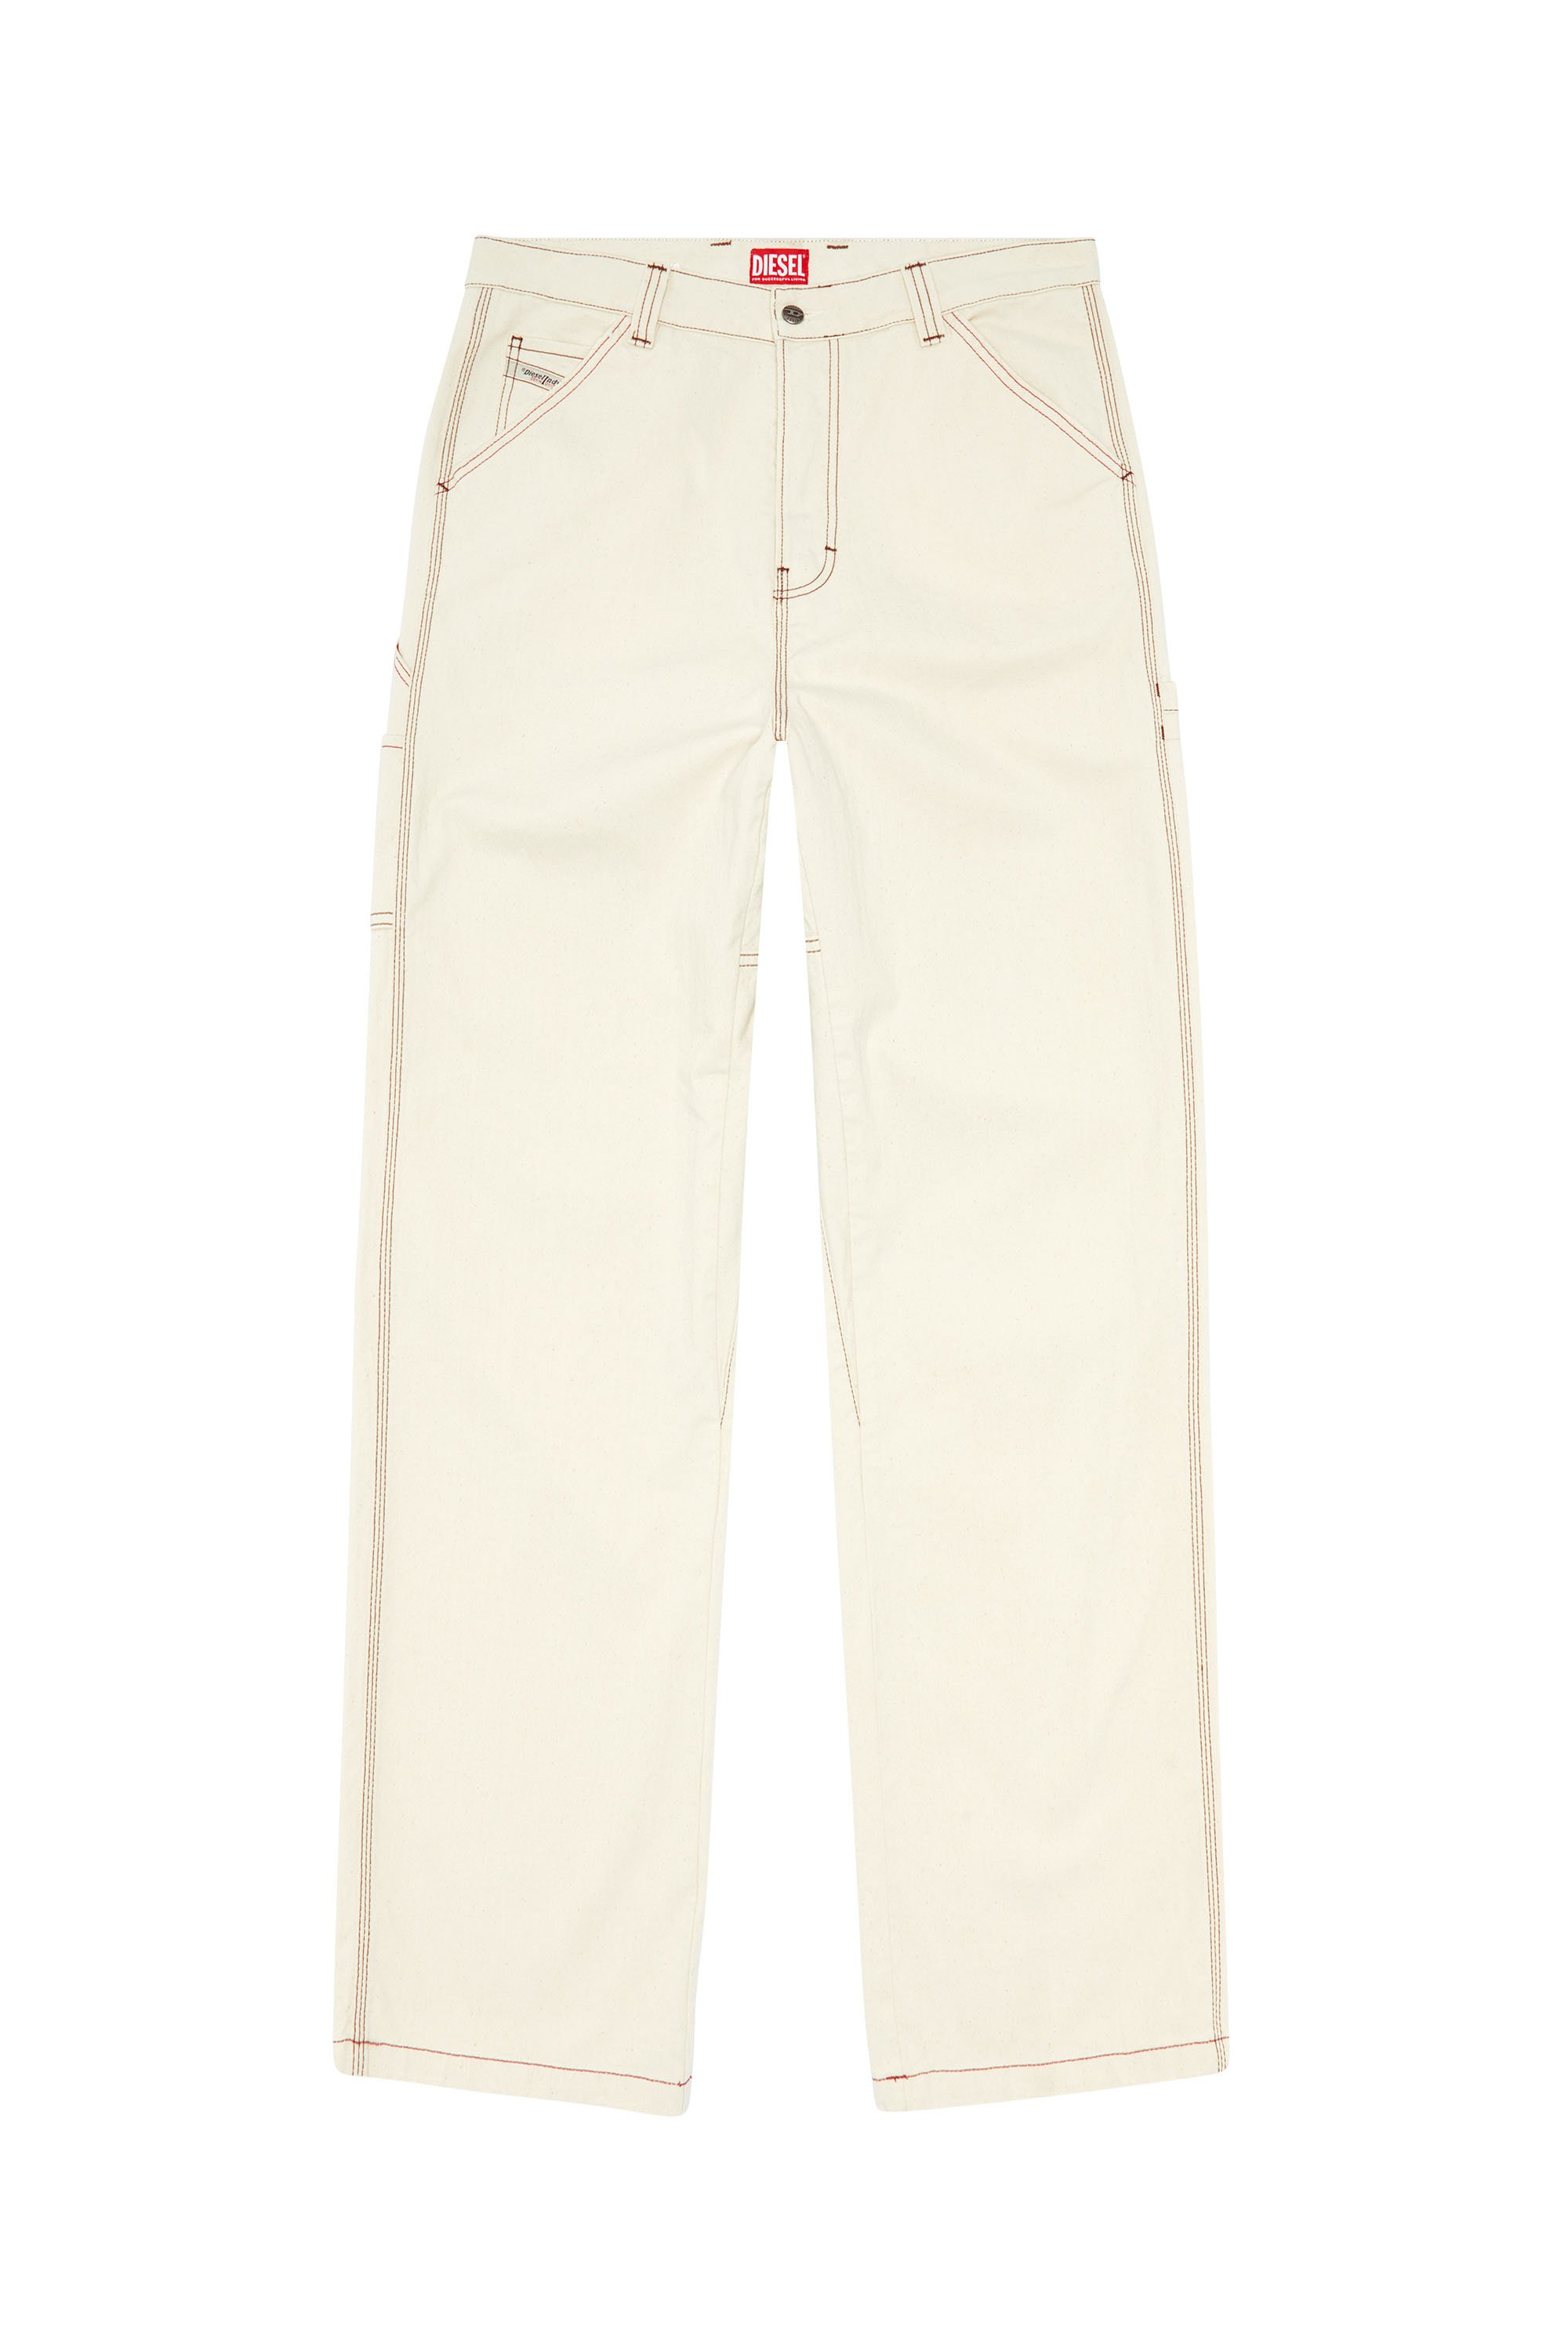 Diesel - Straight Jeans D-Livery 0GRDQ, Hombre Straight Jeans - D-Livery in Blanco - Image 3